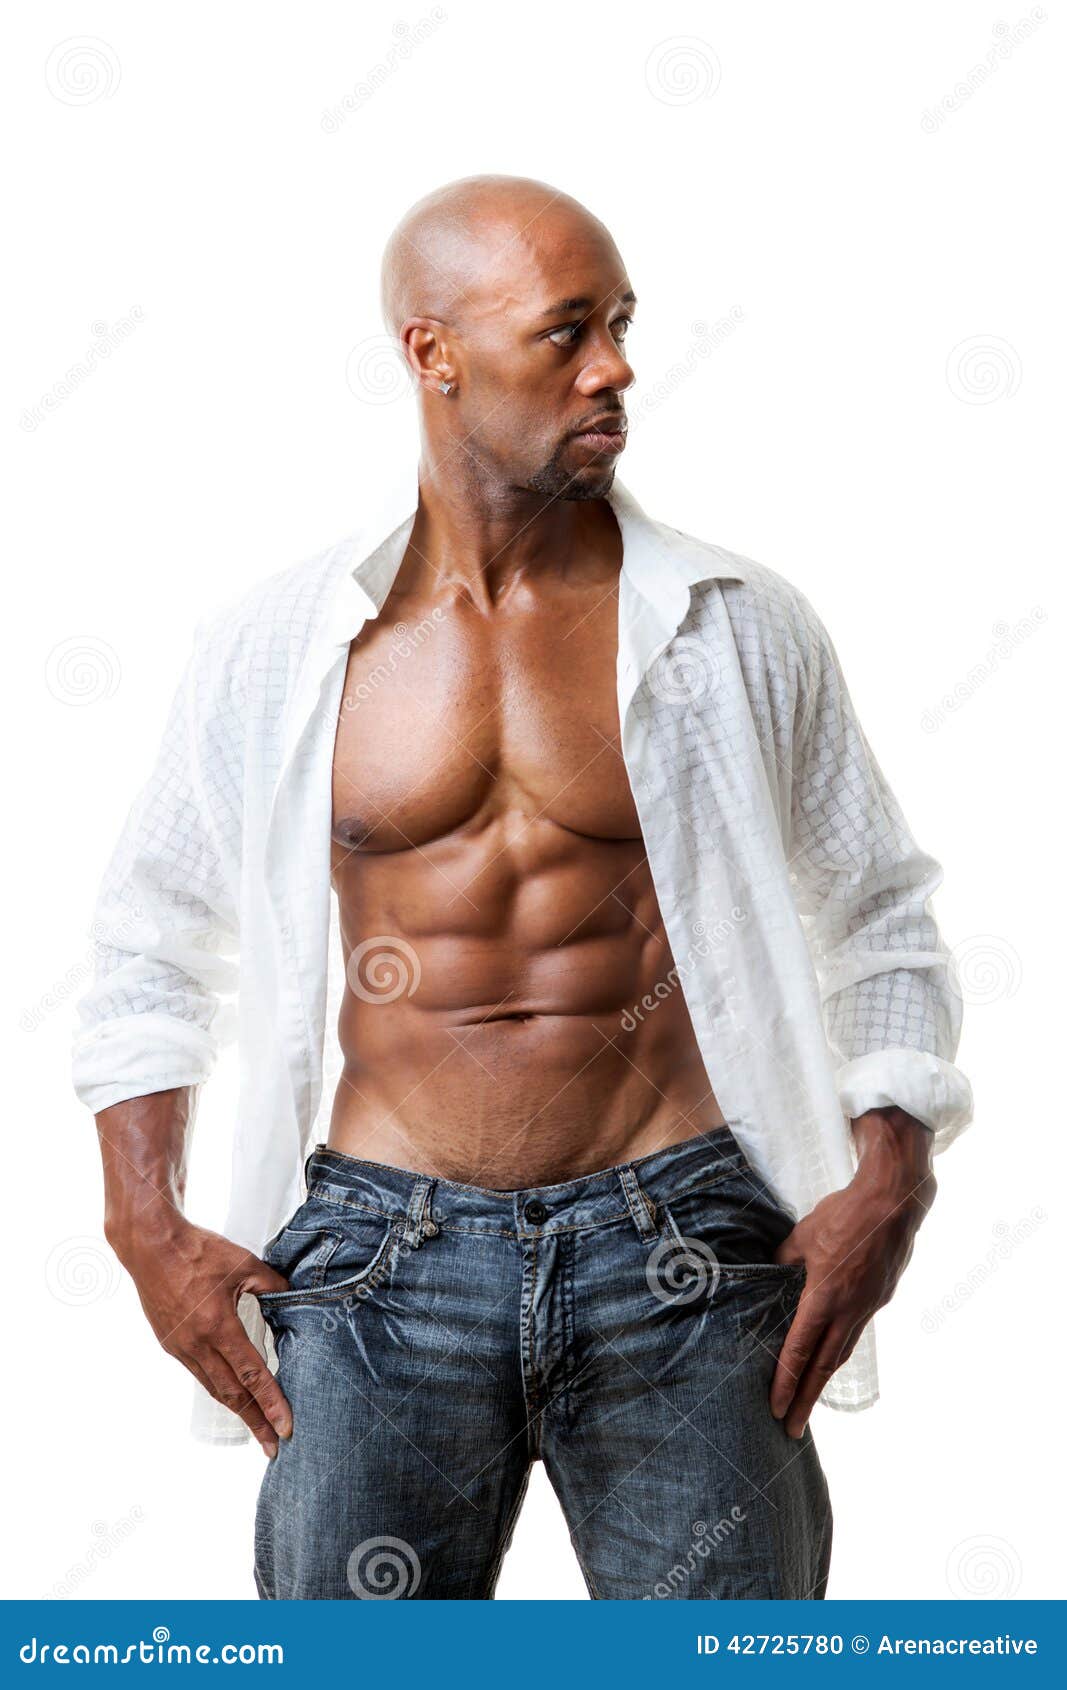 Muscle Man Bicep Curls Stock Photo - Image: 49189813